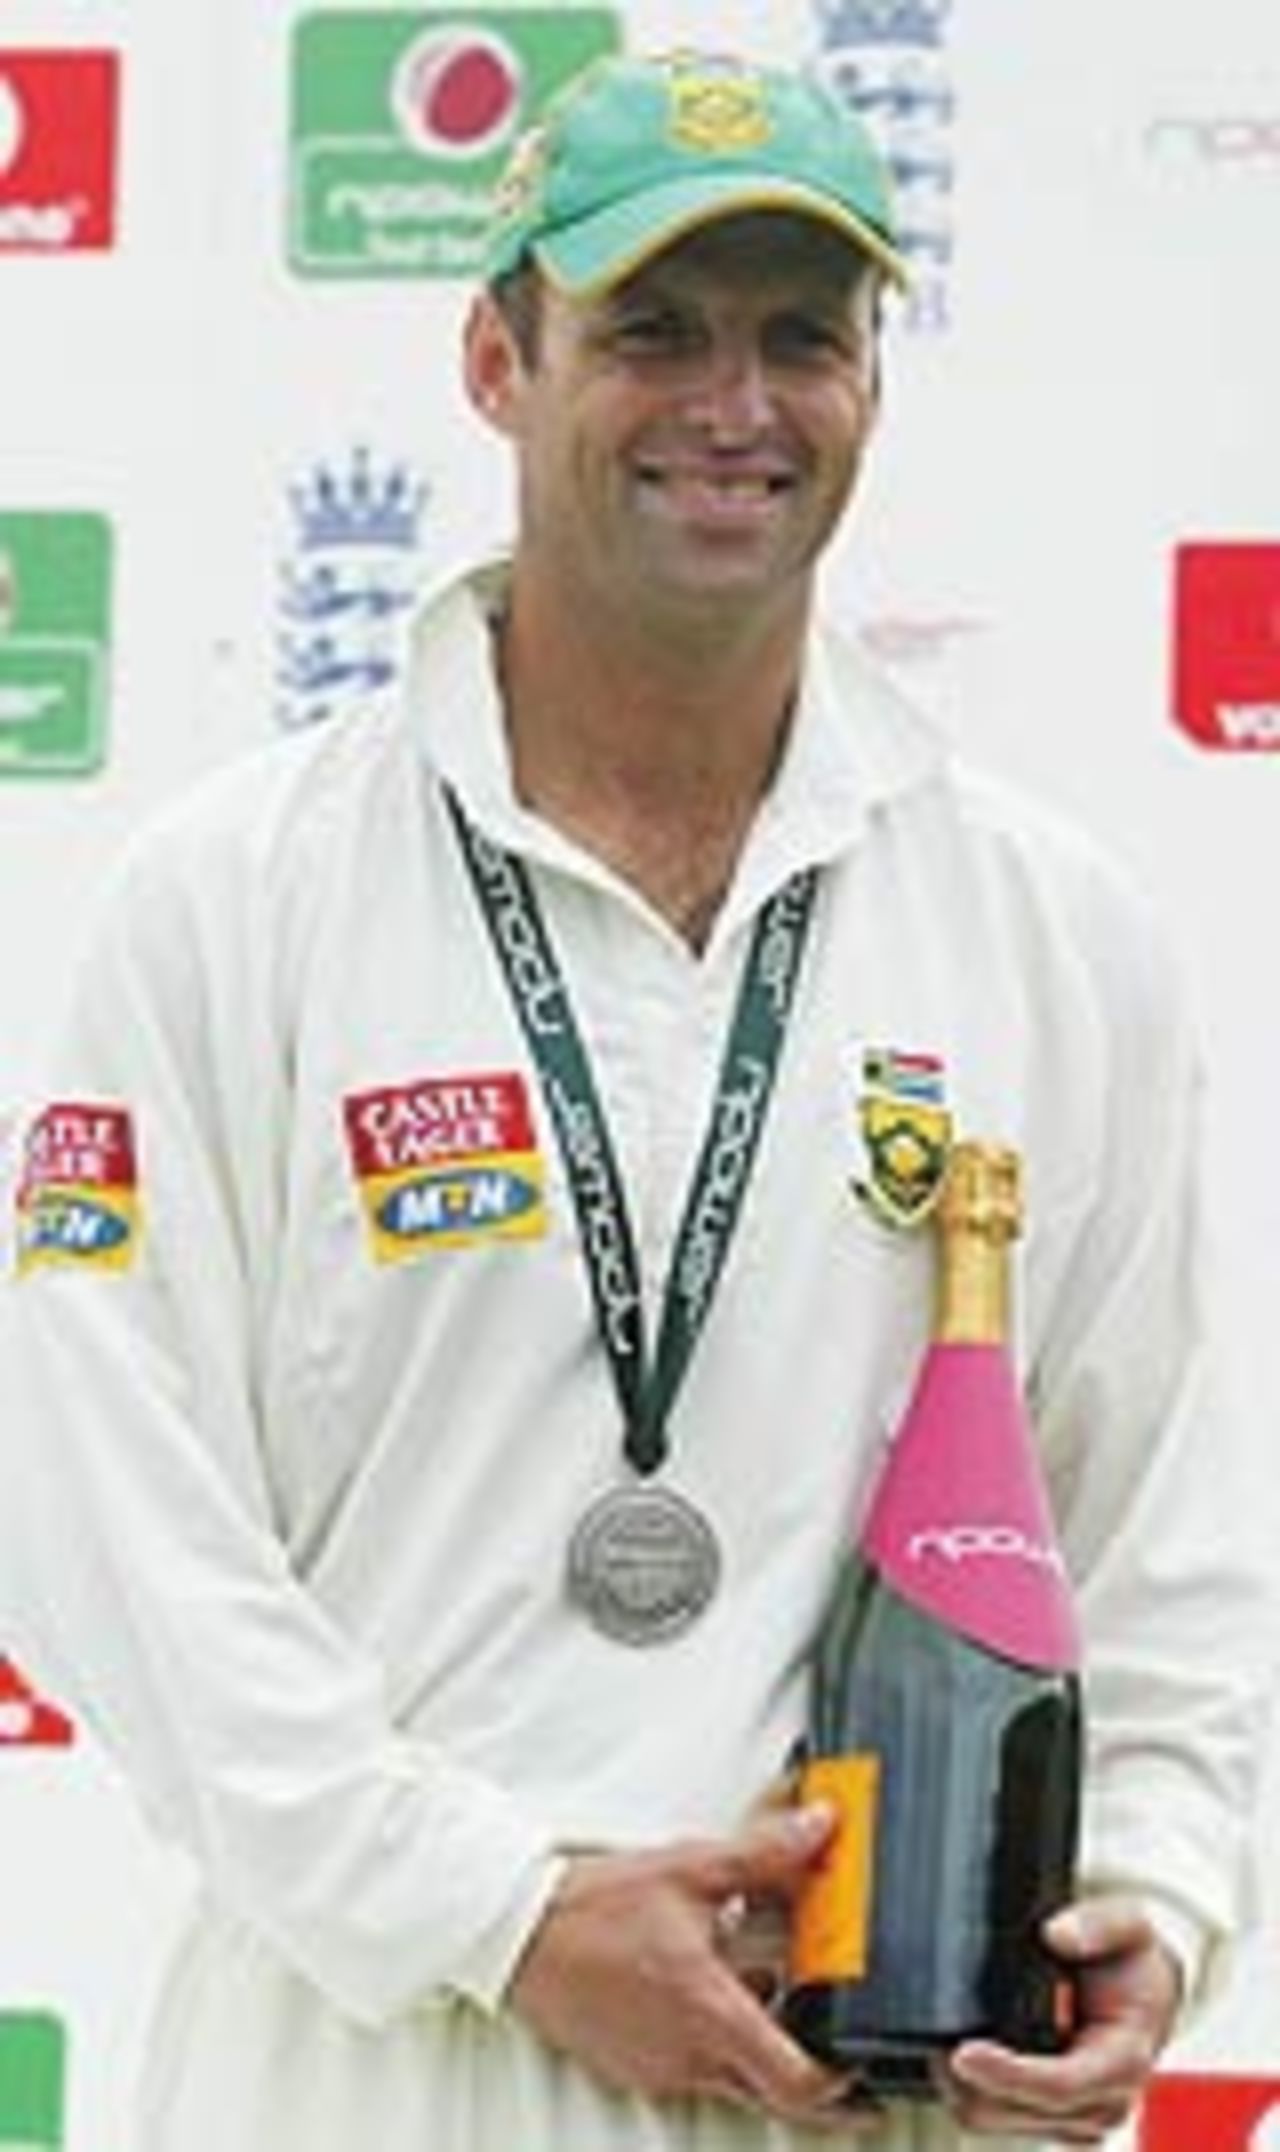 Man of the match Gary Kirsten of South Africa with his award at the end of the fifth day of the fourth npower test match between England and South Africa at Headingley Cricket Ground on August 25, 2003 in Leeds, England.